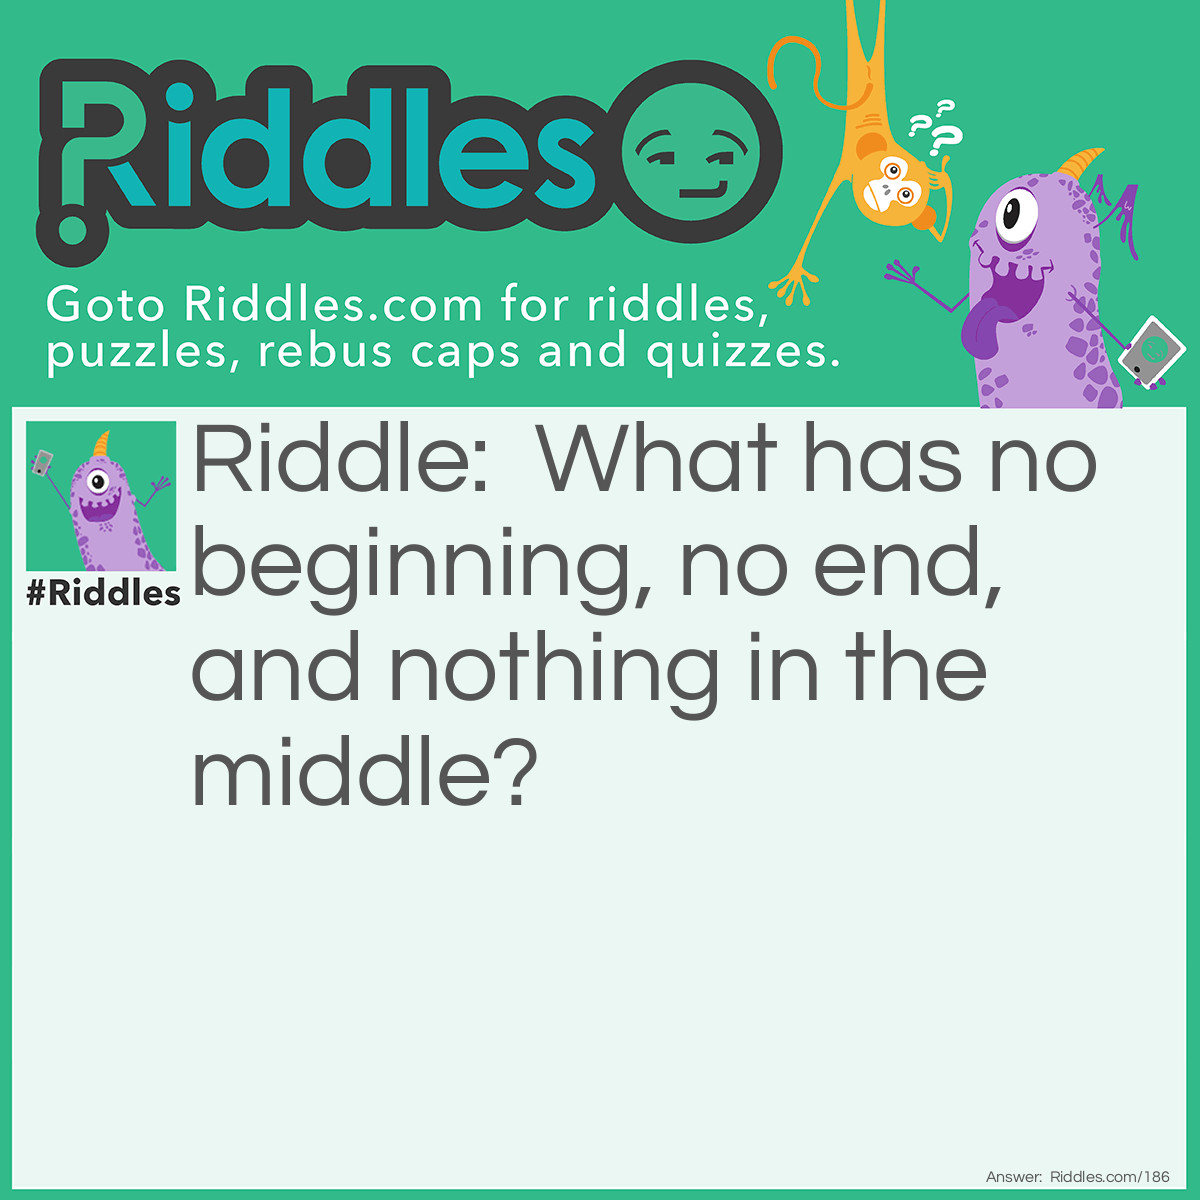 Riddle: What has no beginning, end, or middle? Answer: A doughnut (also a donut).